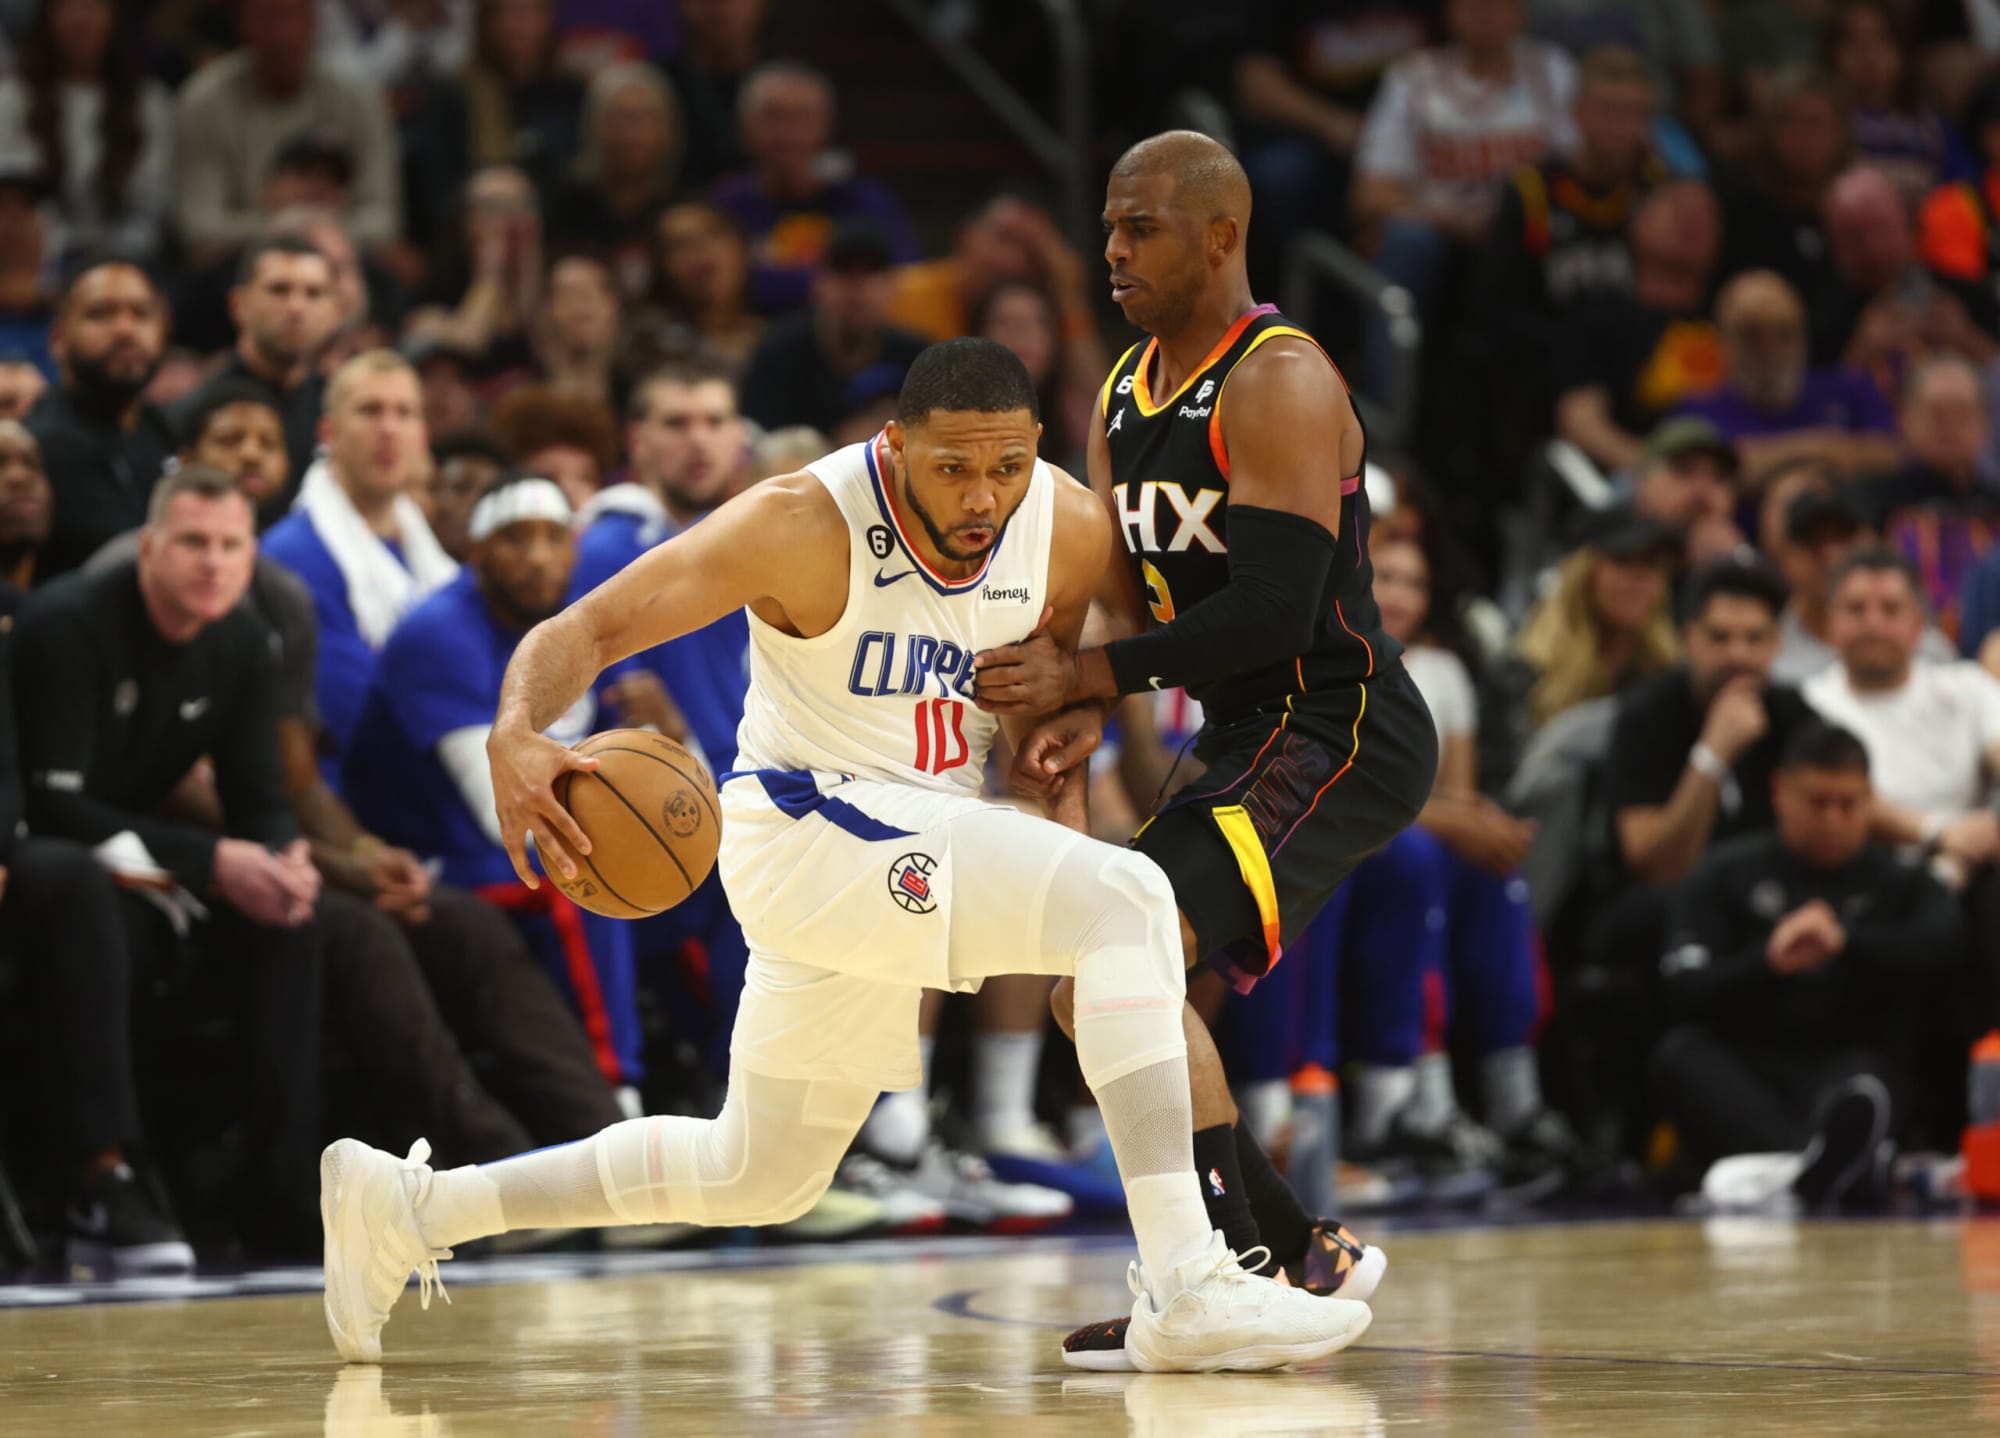 L.A. Clippers vs. Denver Nuggets: Preview, Analysis and